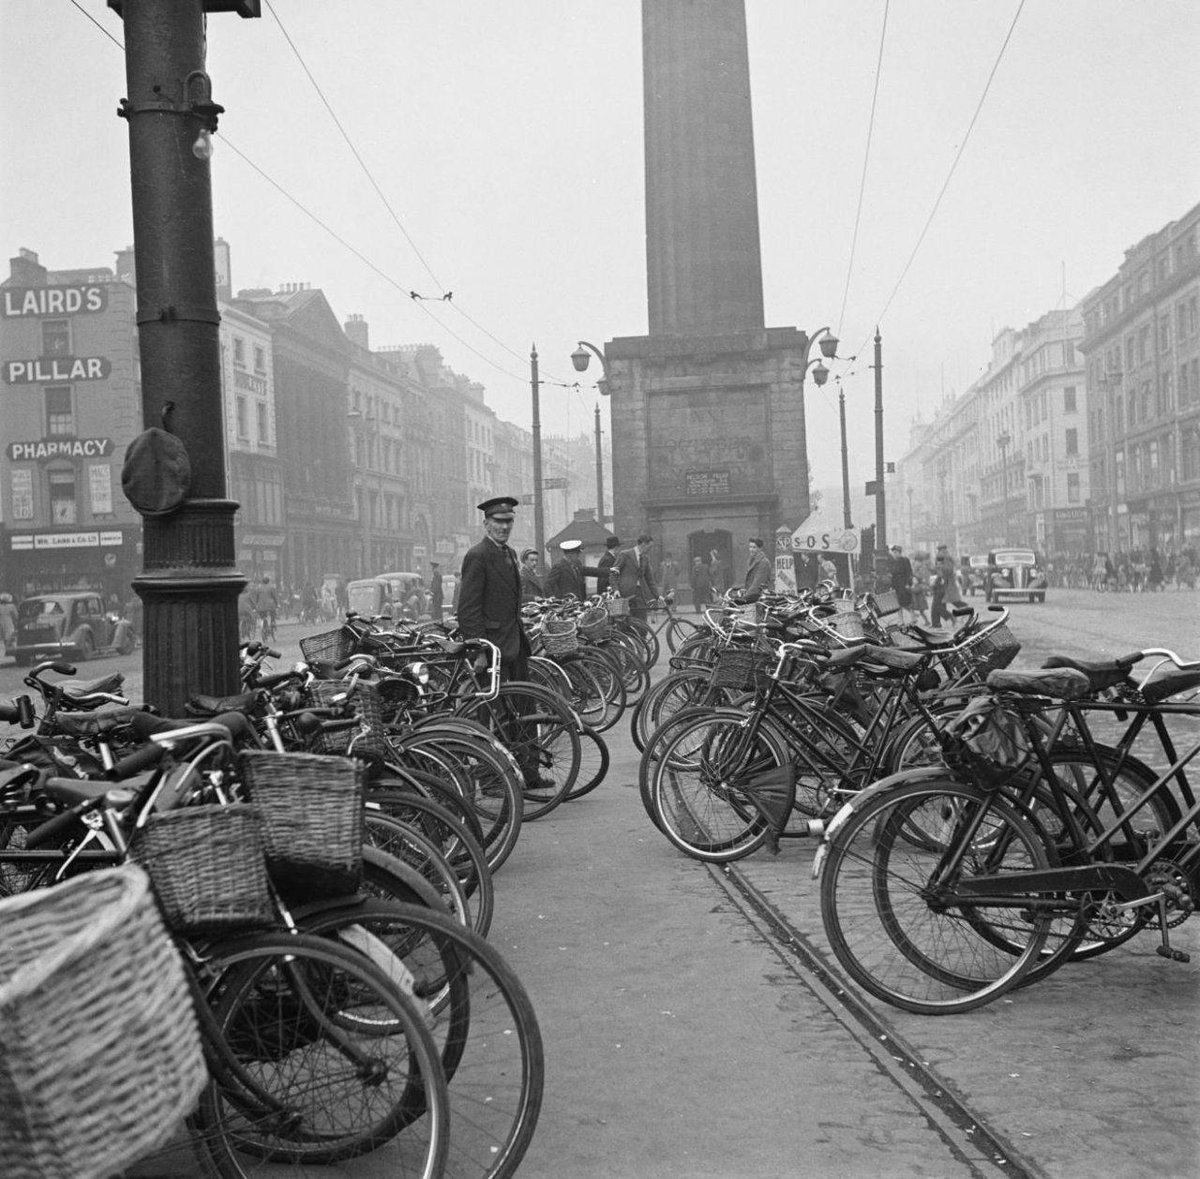 #OnThisDay in 1942 Thomas Whelan from Killester was given 3 years in Mountjoy Prison for selling stolen bicycles. It was hoped his sentence would help bring an end to the epidemic of bicycle thefts in Dublin - in 1942 5,000 bicycles were stolen in the capital. #DublinSince1922